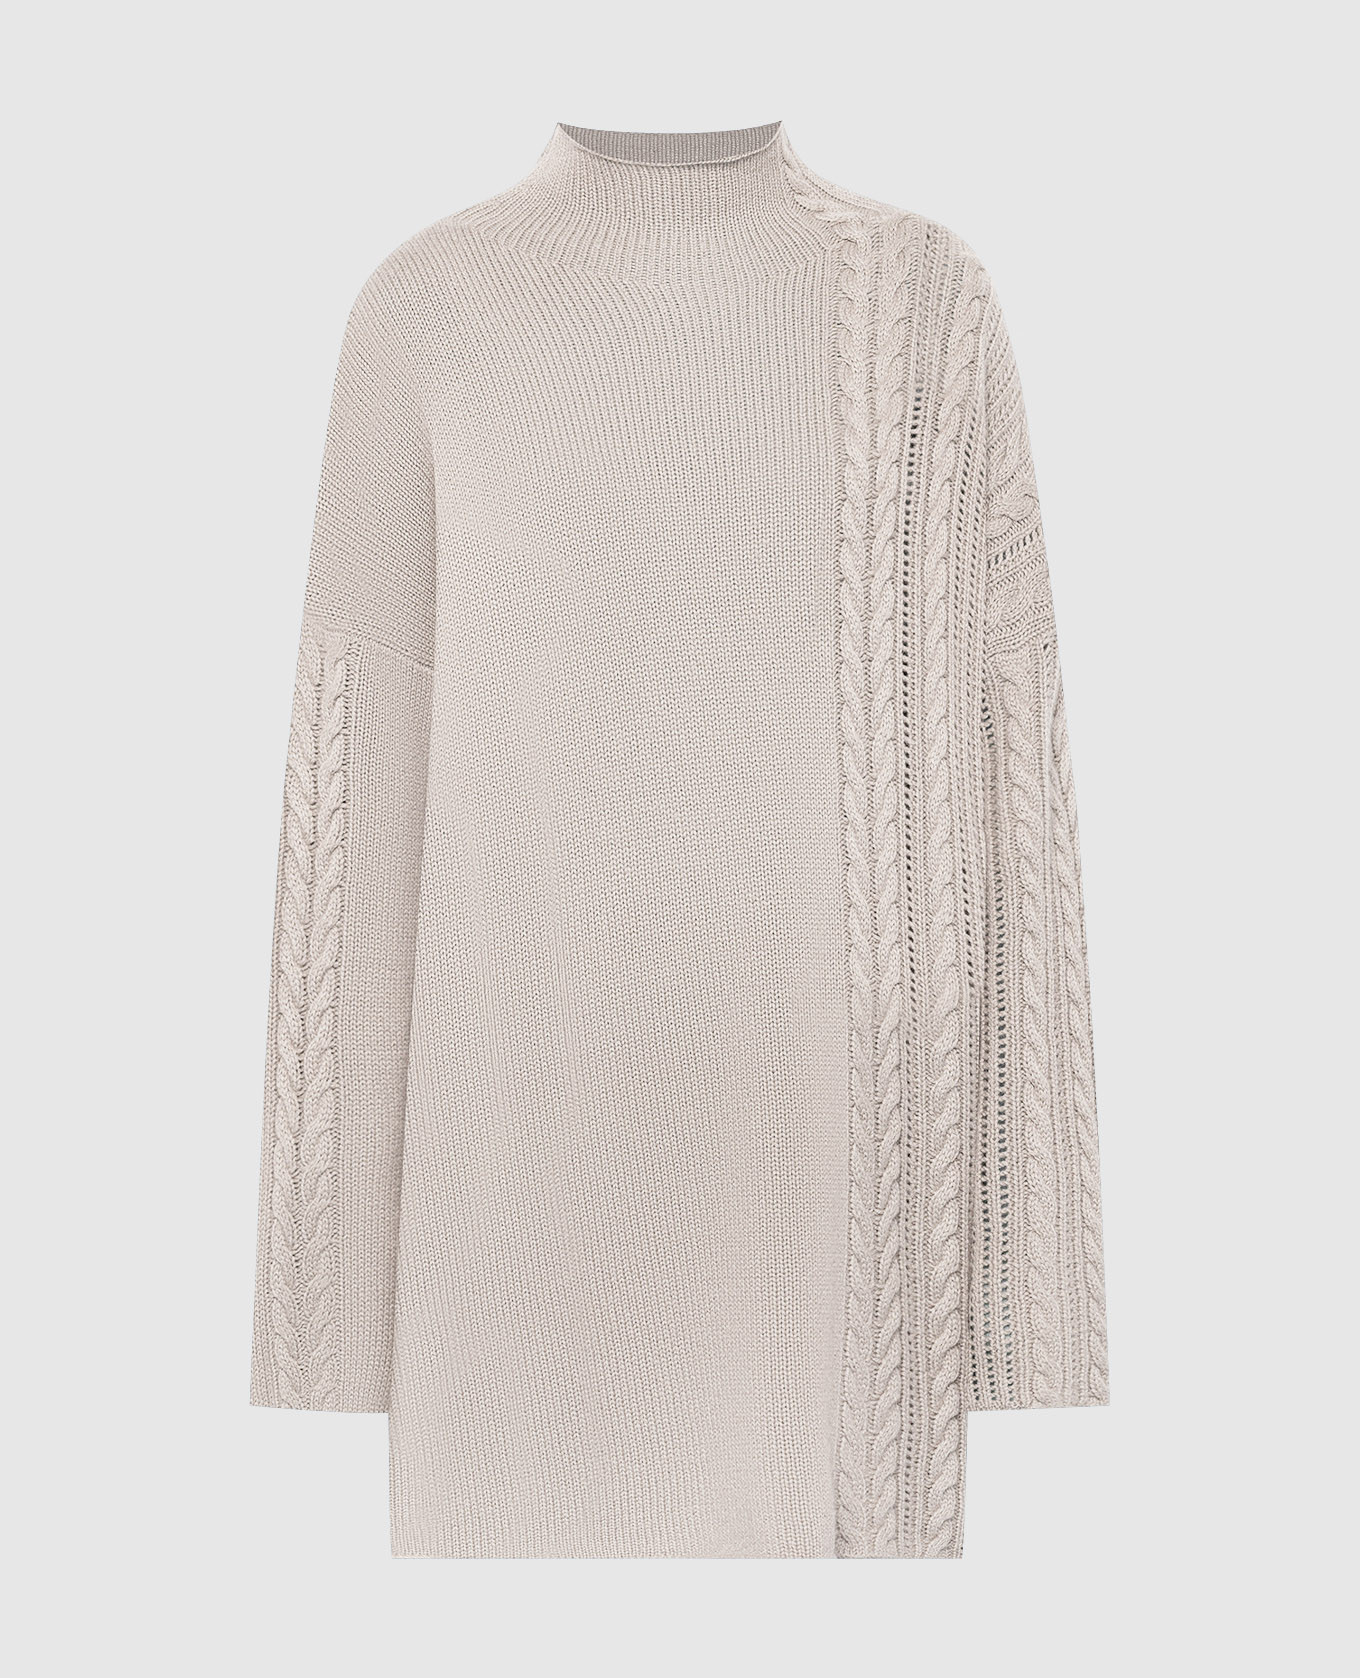 Beige cashmere sweater with a textured pattern